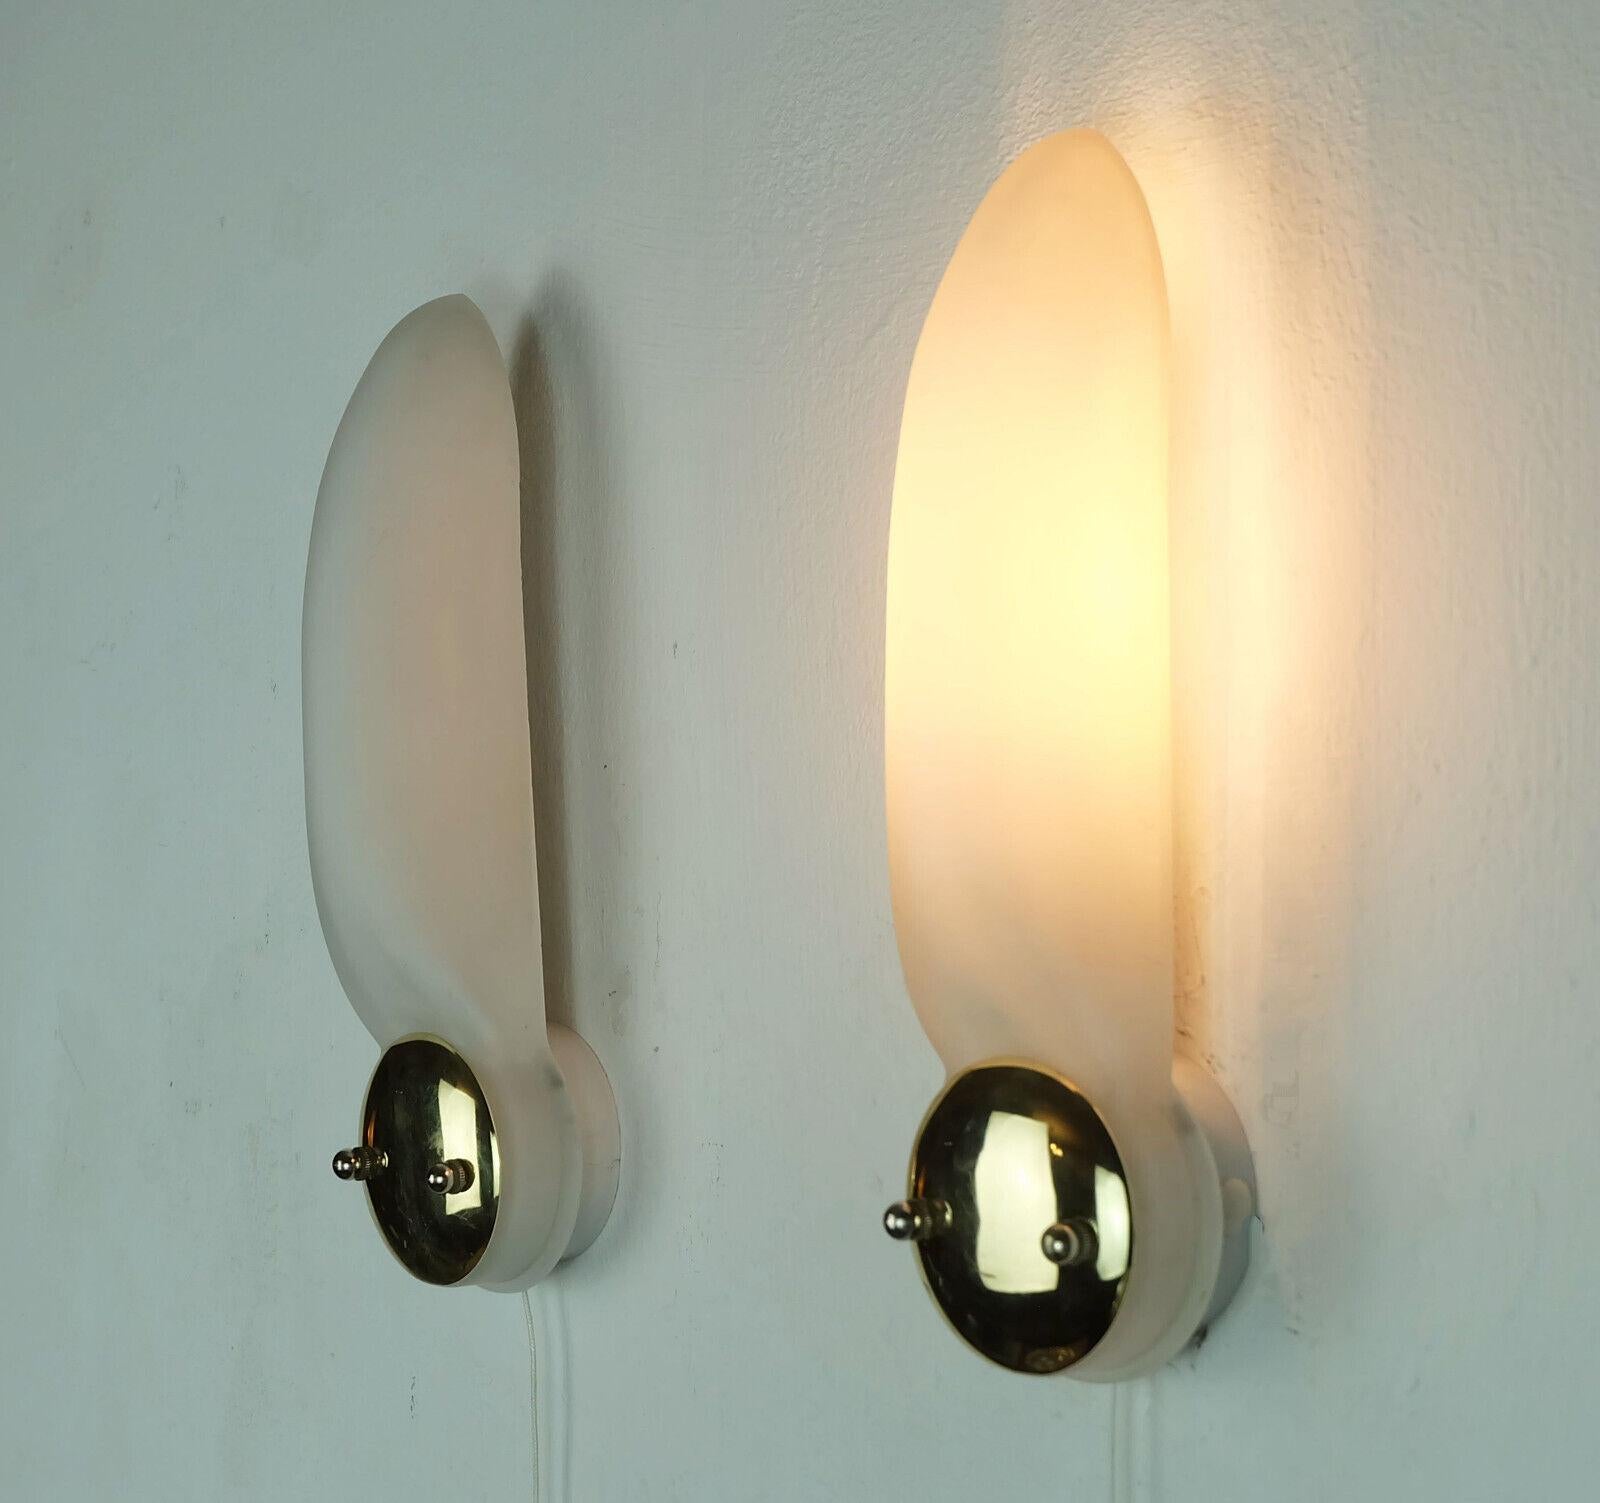 Pair of 1990s sconces manufactured by Honsel. Matt white opaline glass shades with brass details, base white lacquered metal. Holds 1 E14 light bulb each.

Dimensions in cm: 
Length 29 cm, width 8 cm, depth 8 cm.

Dimensions in inches:
Length